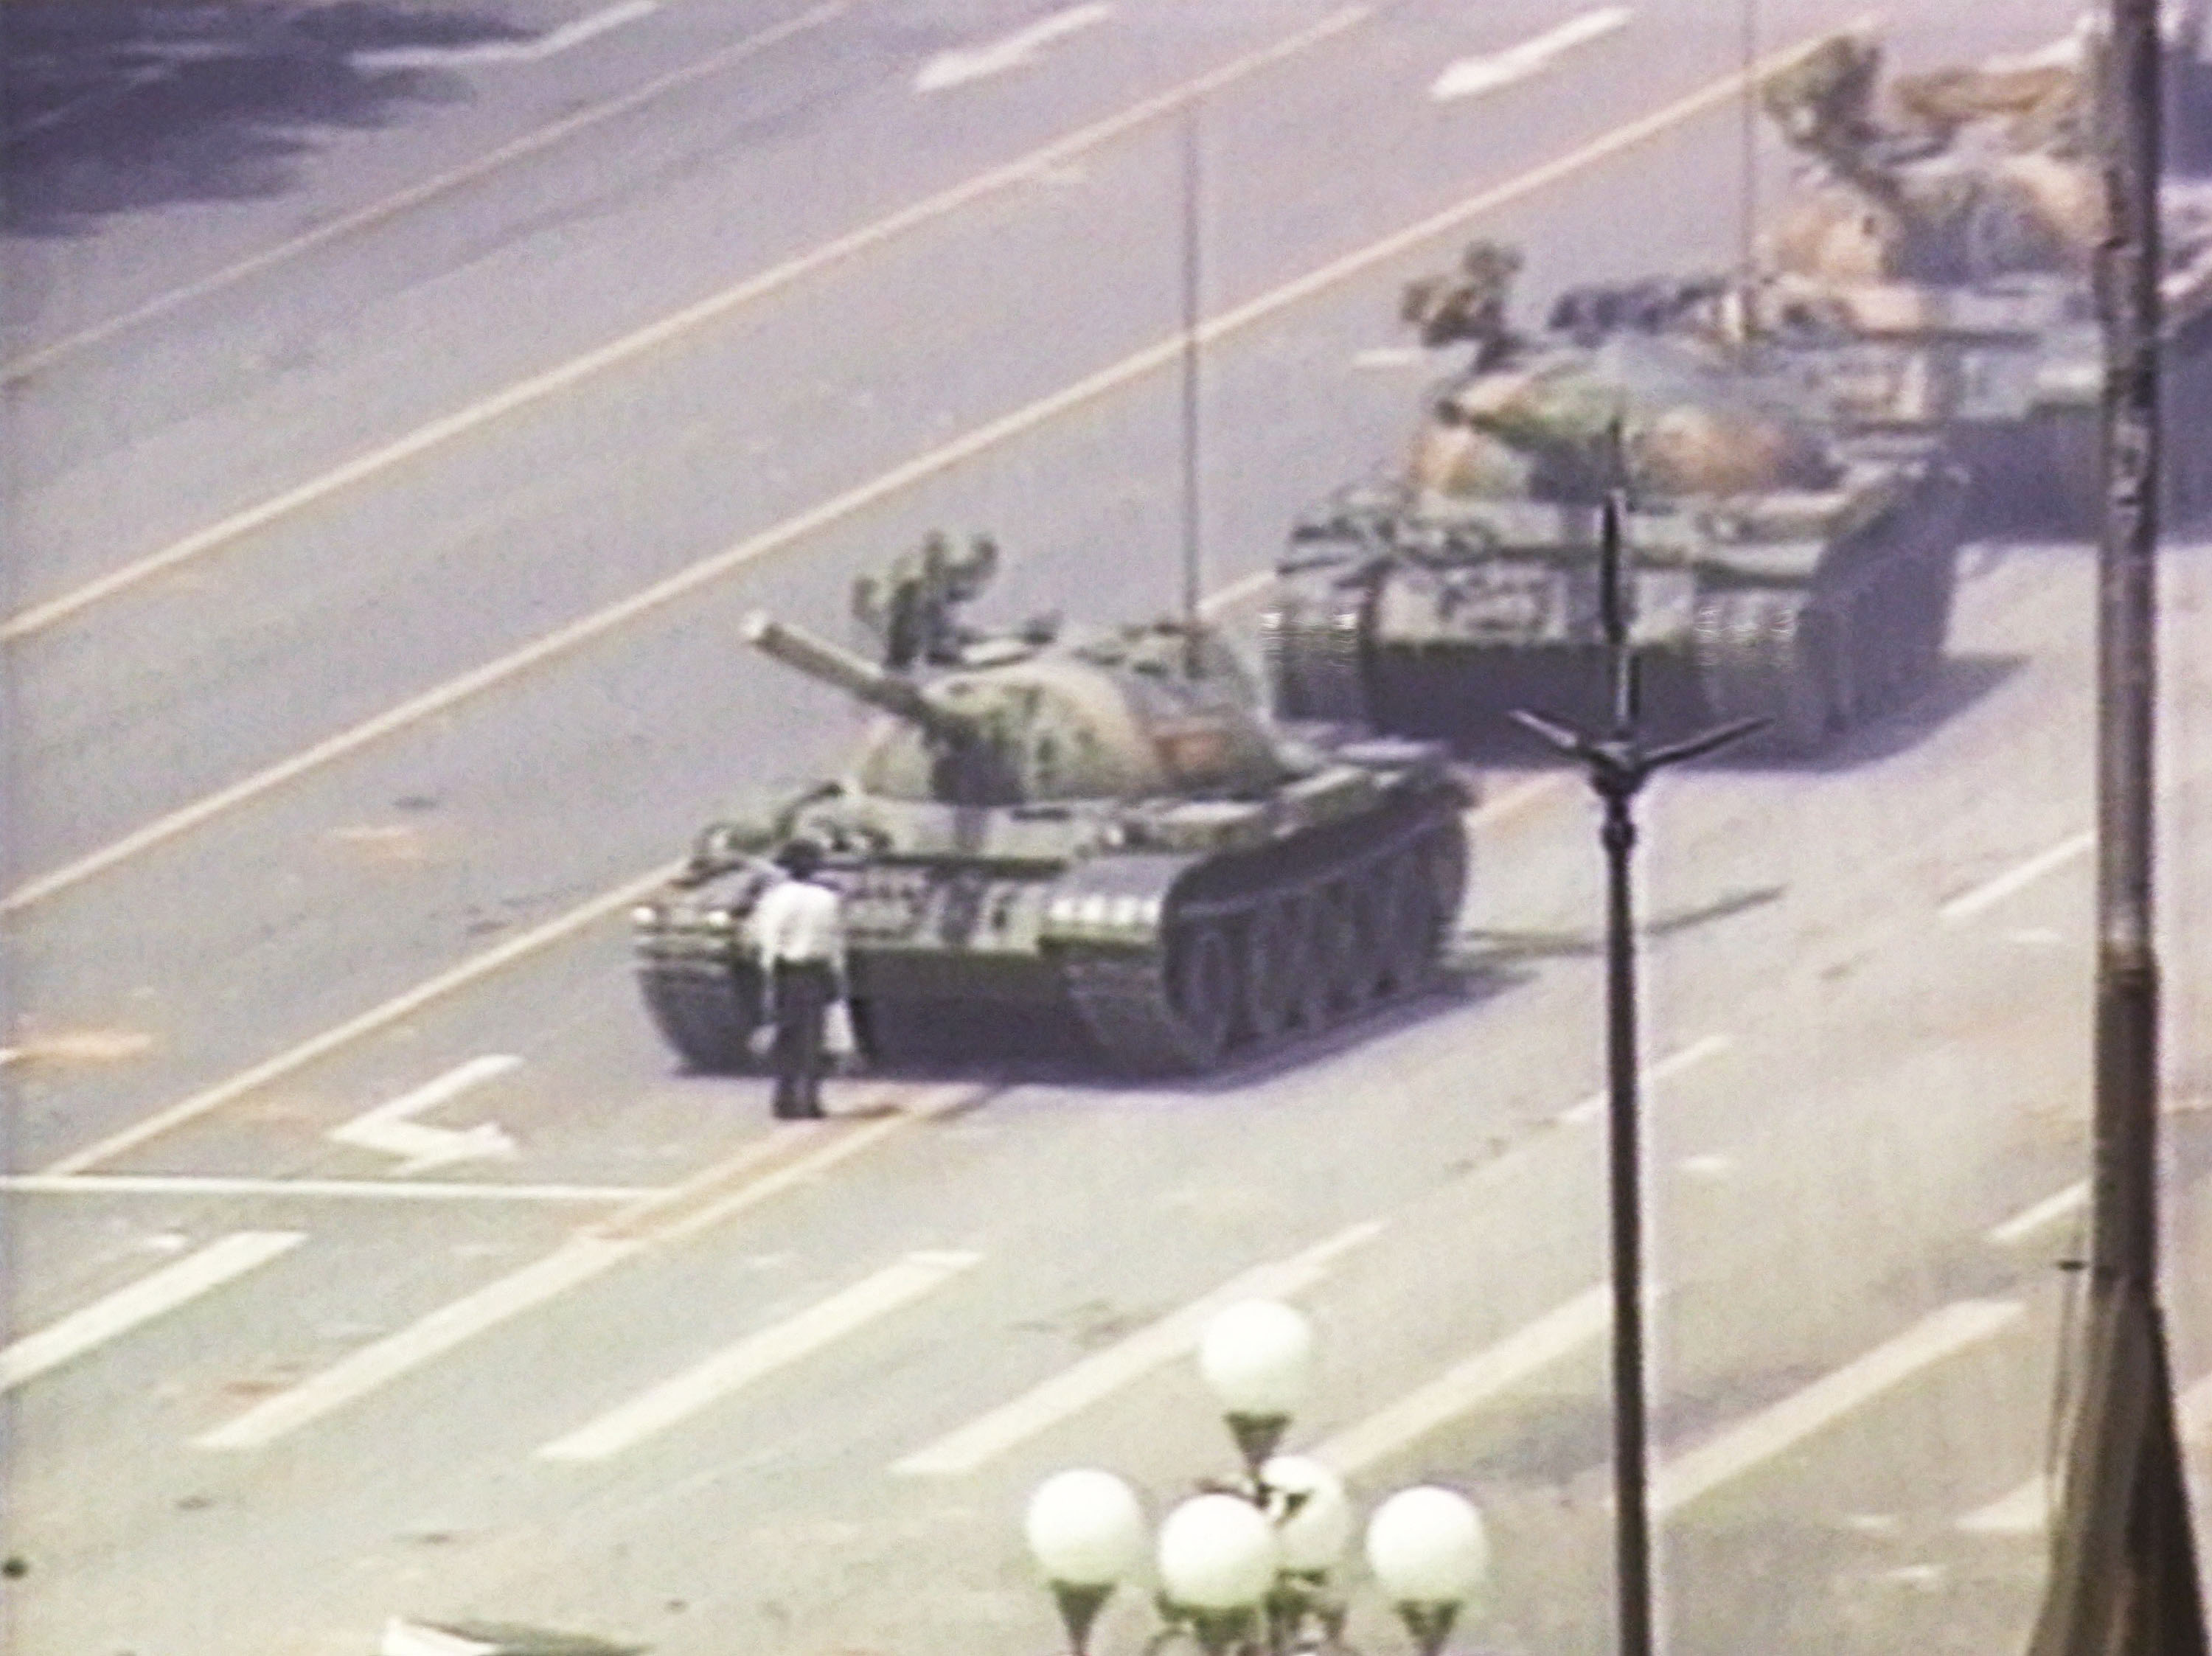 A lone demonstrator stands down a column of tanks June 5, 1989, at the entrance to Tiananmen Square in Beijing. The incident took place on the morning after Chinese troops fired on pro-democracy students who had been protesting in the square since April 15, 1989 (CNN—Getty Images)